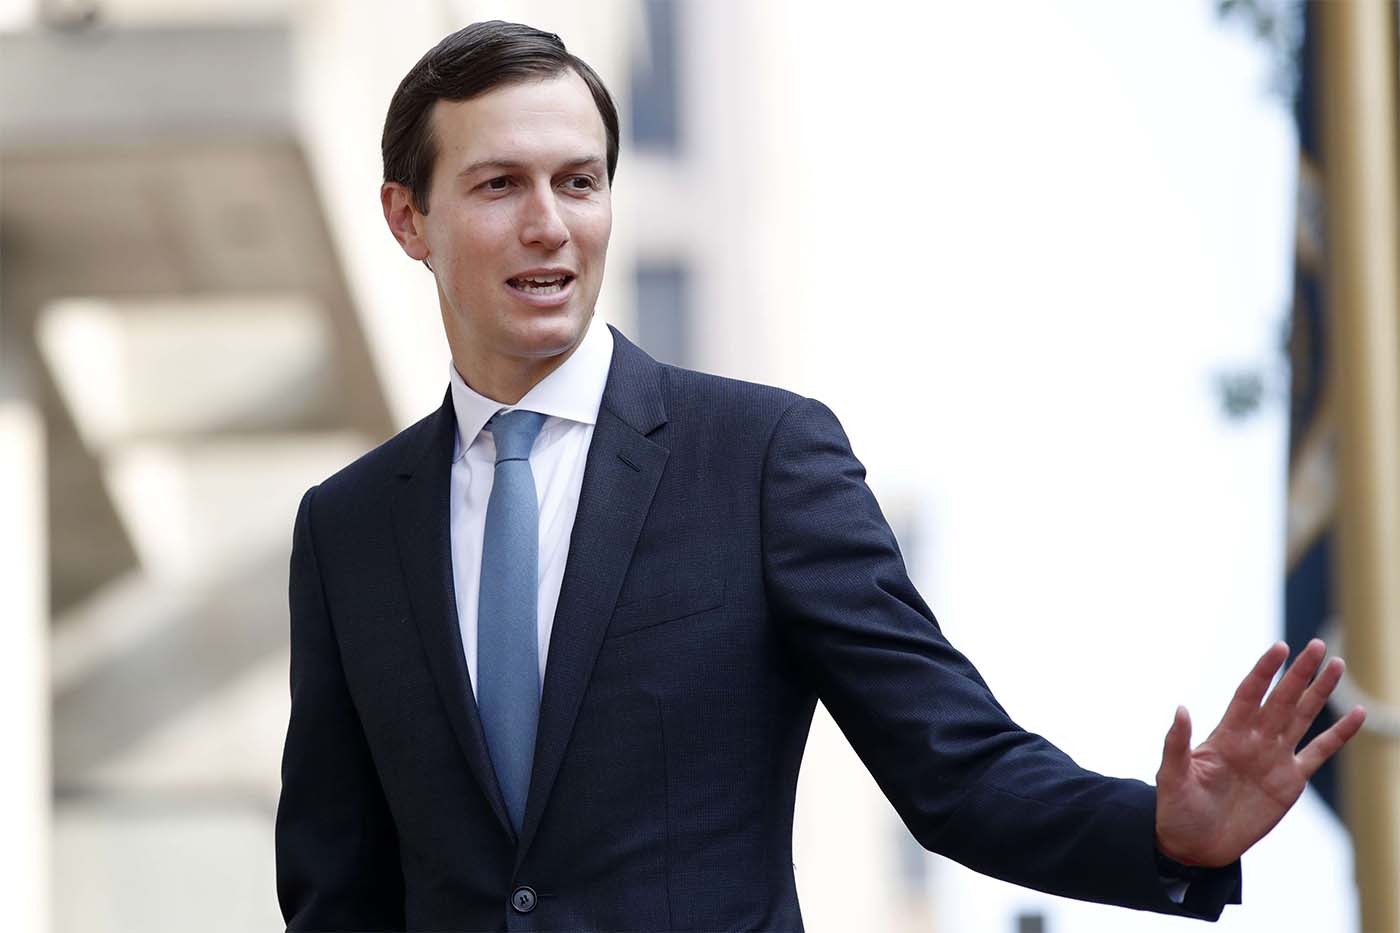 Jared Kushner has been drafting the long-awaited peace plan that has already been rejected by the Palestinians